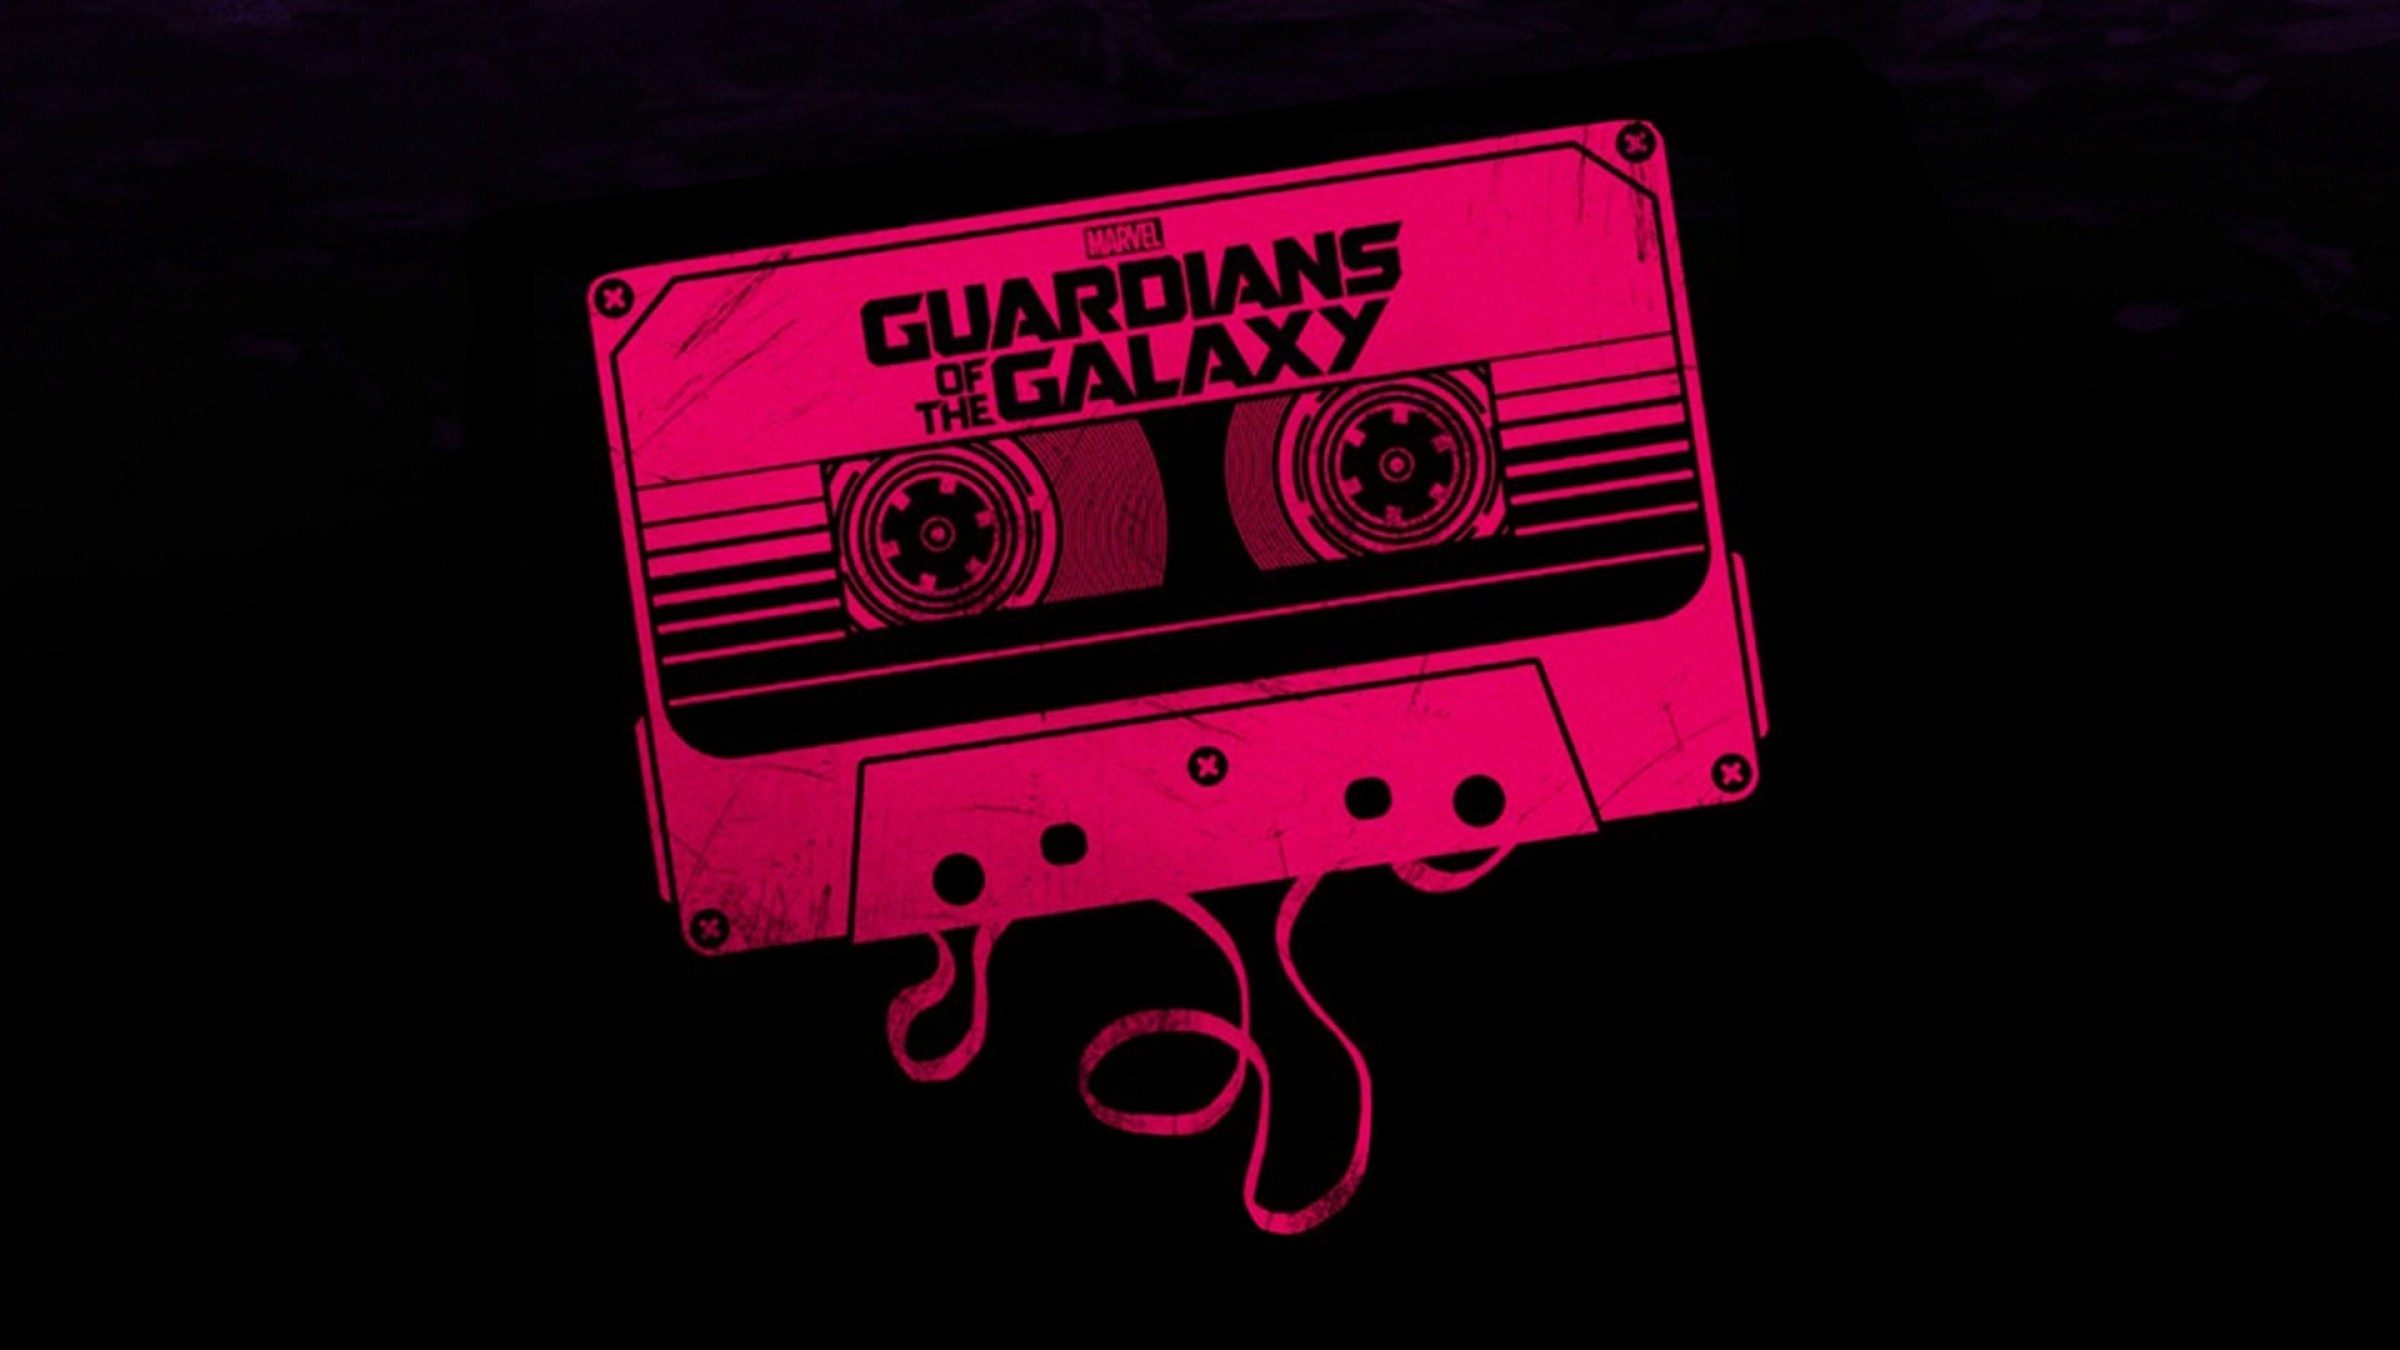 Guardians Of The Galaxy, Star Lord, Gamora, Rocket Raccoon, Groot, Drax The Destroyer Wallpaper